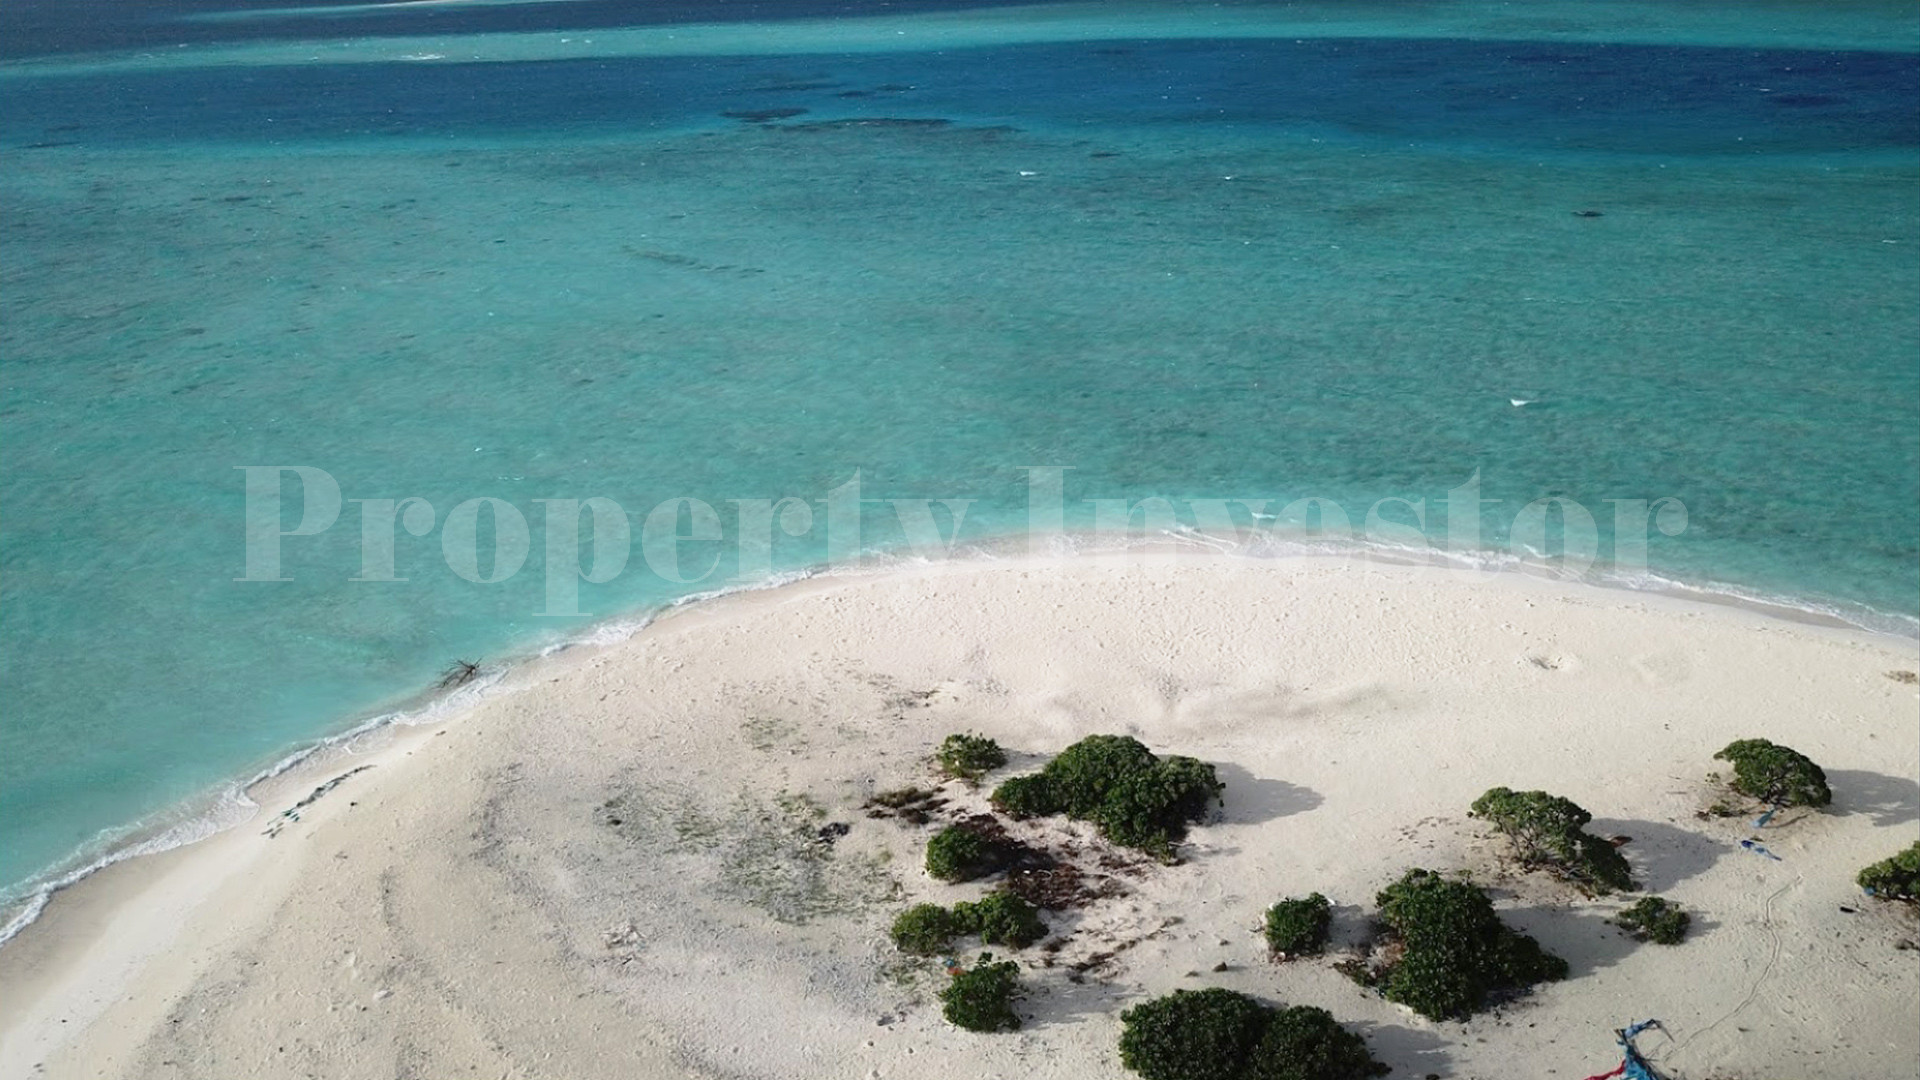 Expansive 80 Hectare Lagoon for Commercial Development for Sale in the Maldives